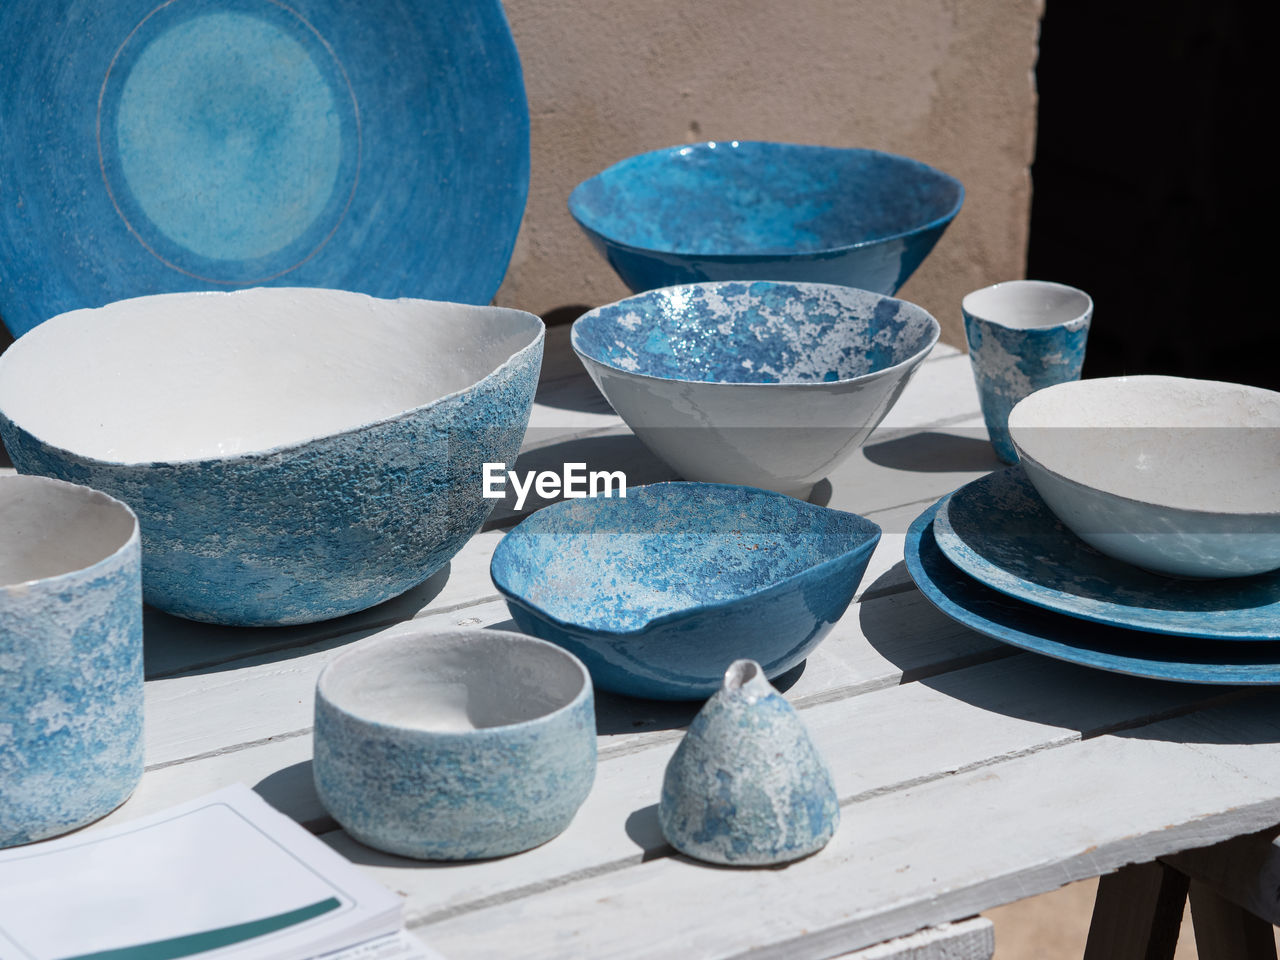 Blue and white ceramic plates, vases, and cups displayed on a wooden table outdoors.